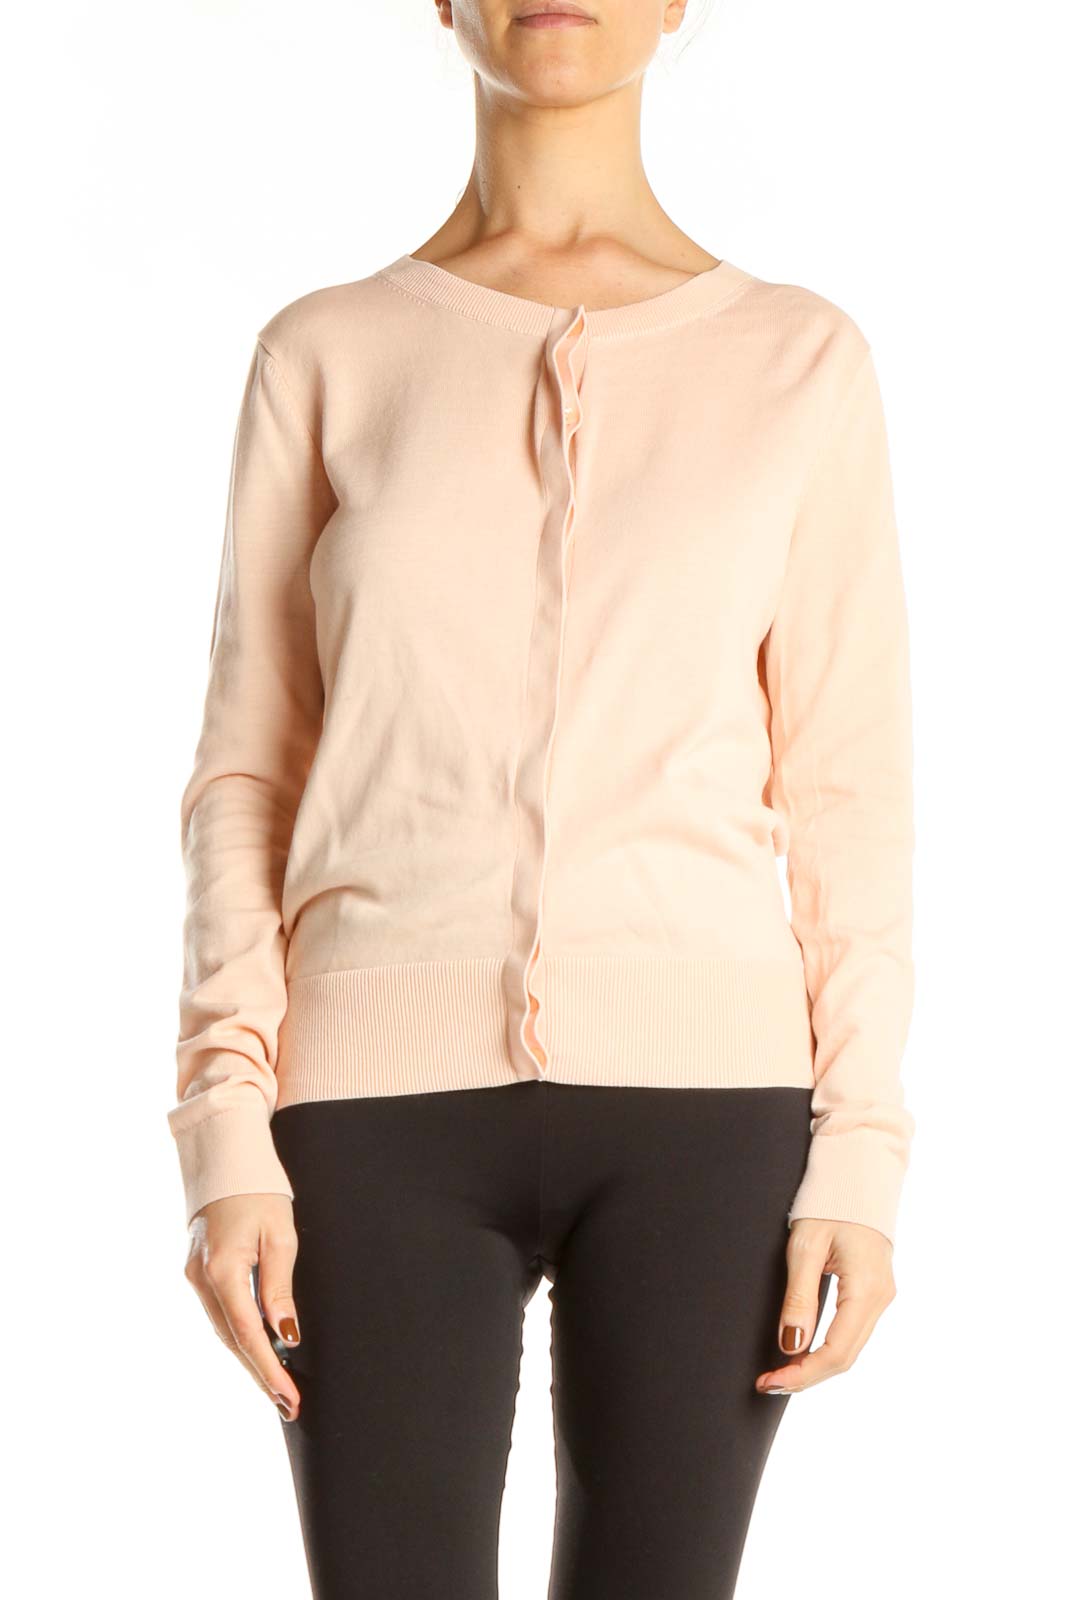 Pink All Day Wear Cardigan Front